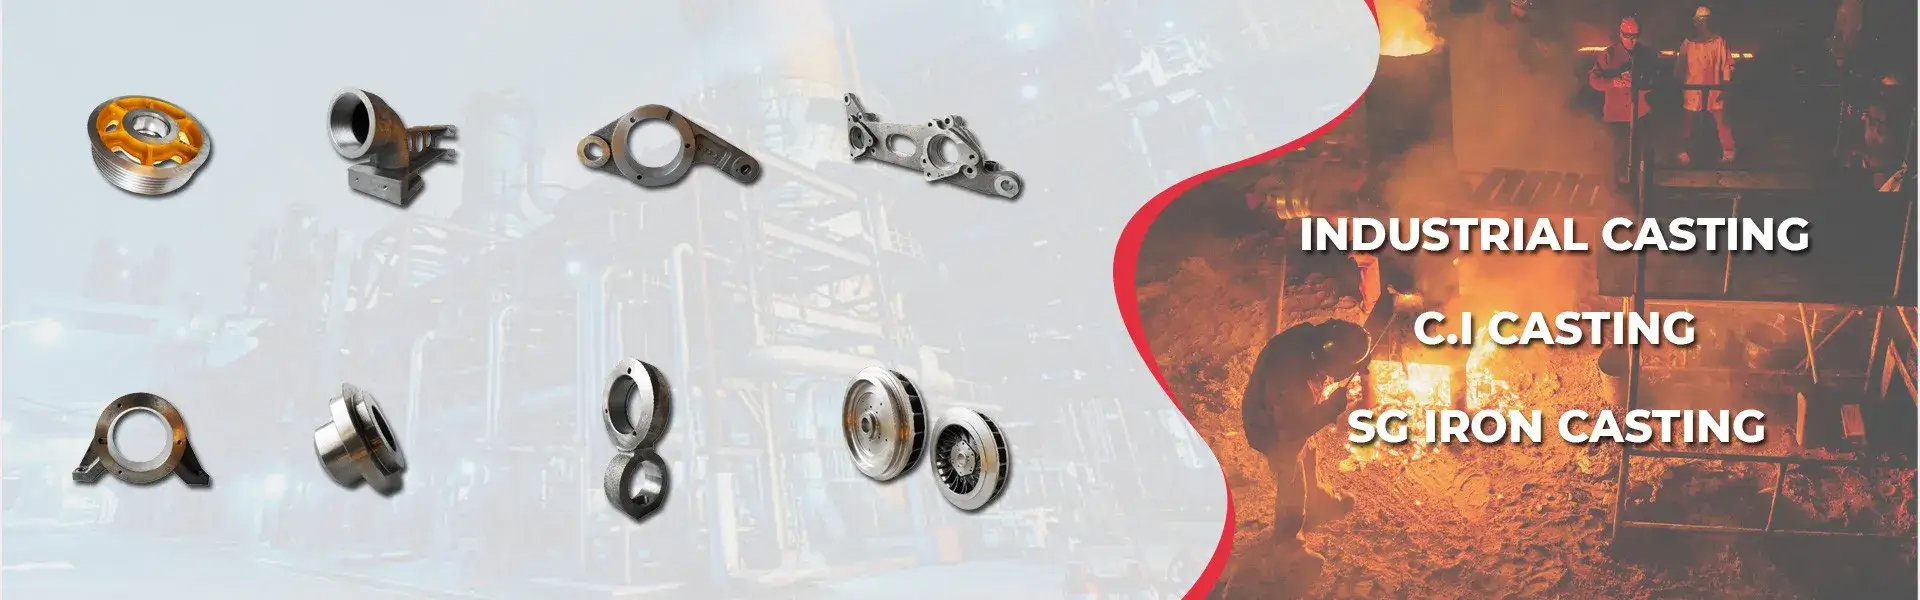 Industrial Castings (Foundry Castings), CI (Cast Iron) Castings, Alloy CI (Cast Iron) Castings, CI (Cast Iron) Graded Castings, CI (Cast Iron) Pipe Fittings, CI (Cast Iron) Products